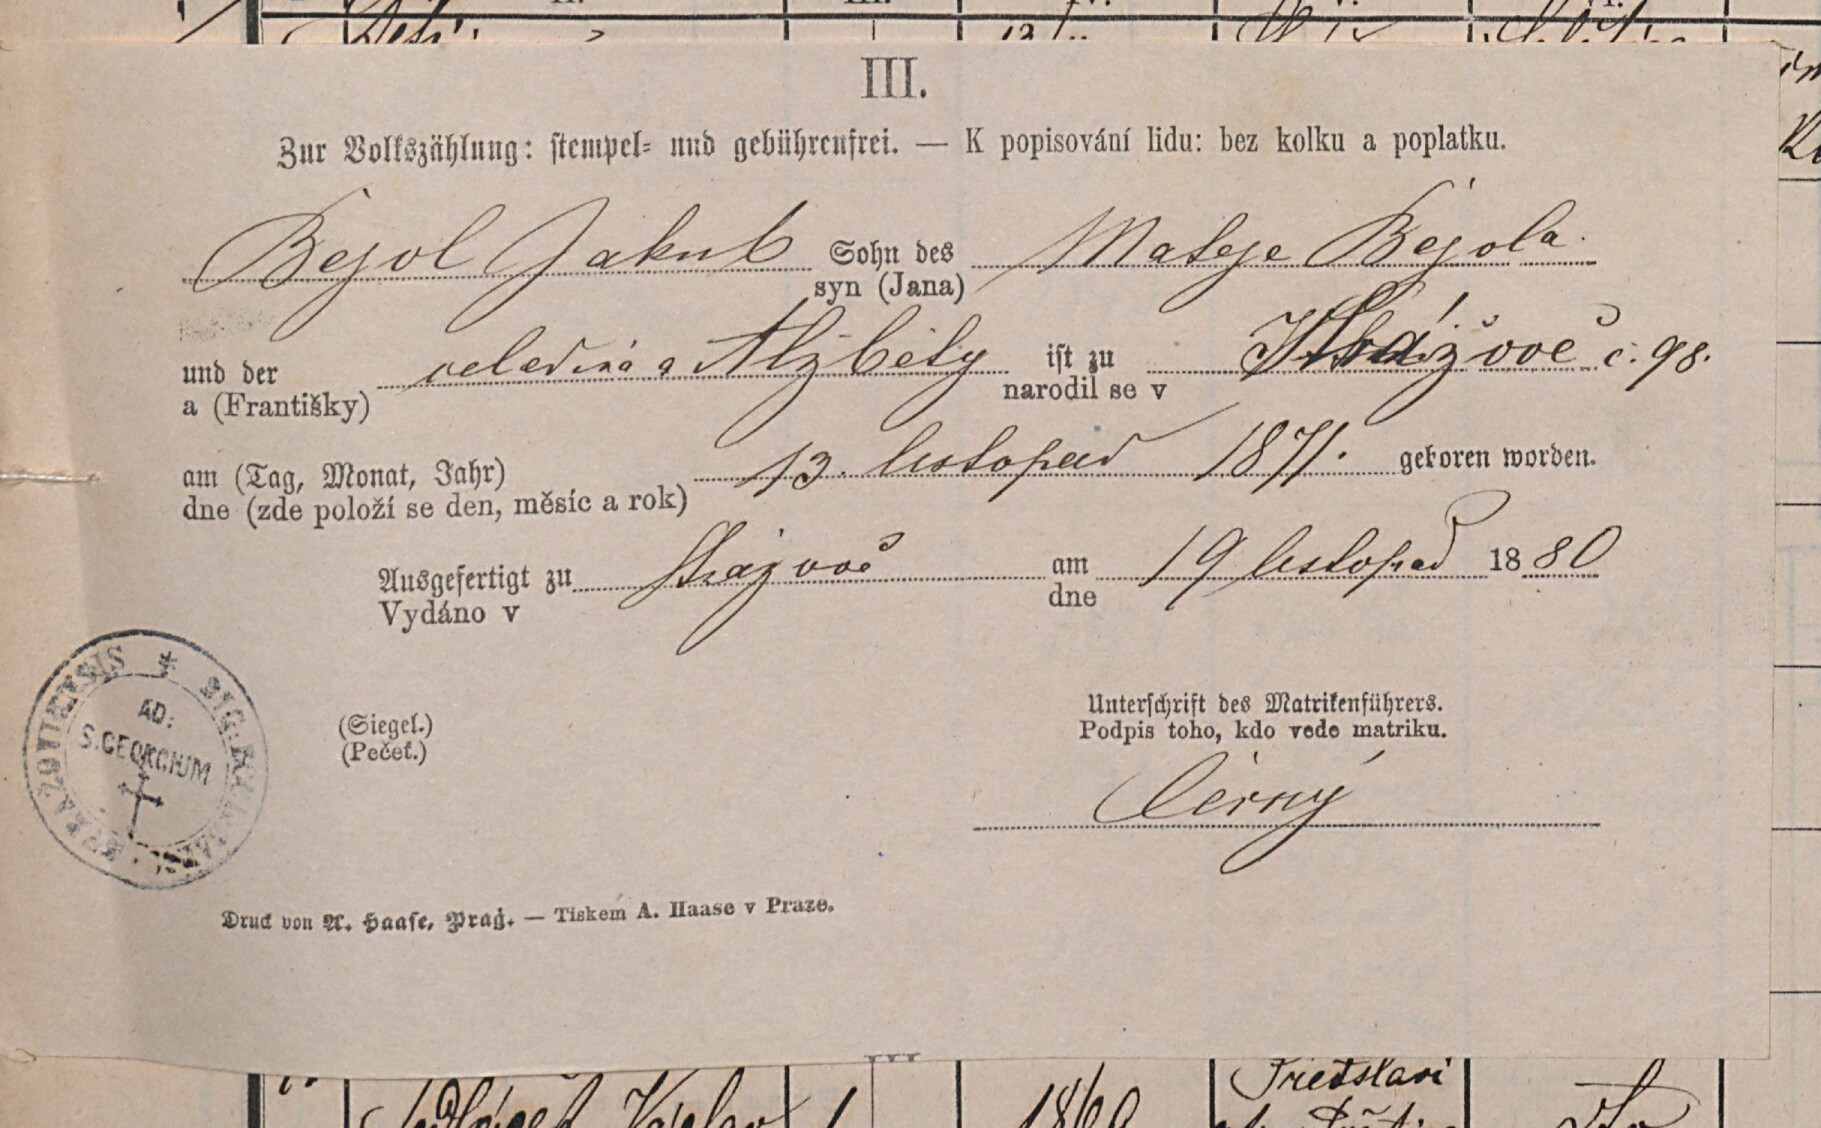 10. soap-kt_01159_census-1880-zahorcice-opalka-cp001_0100